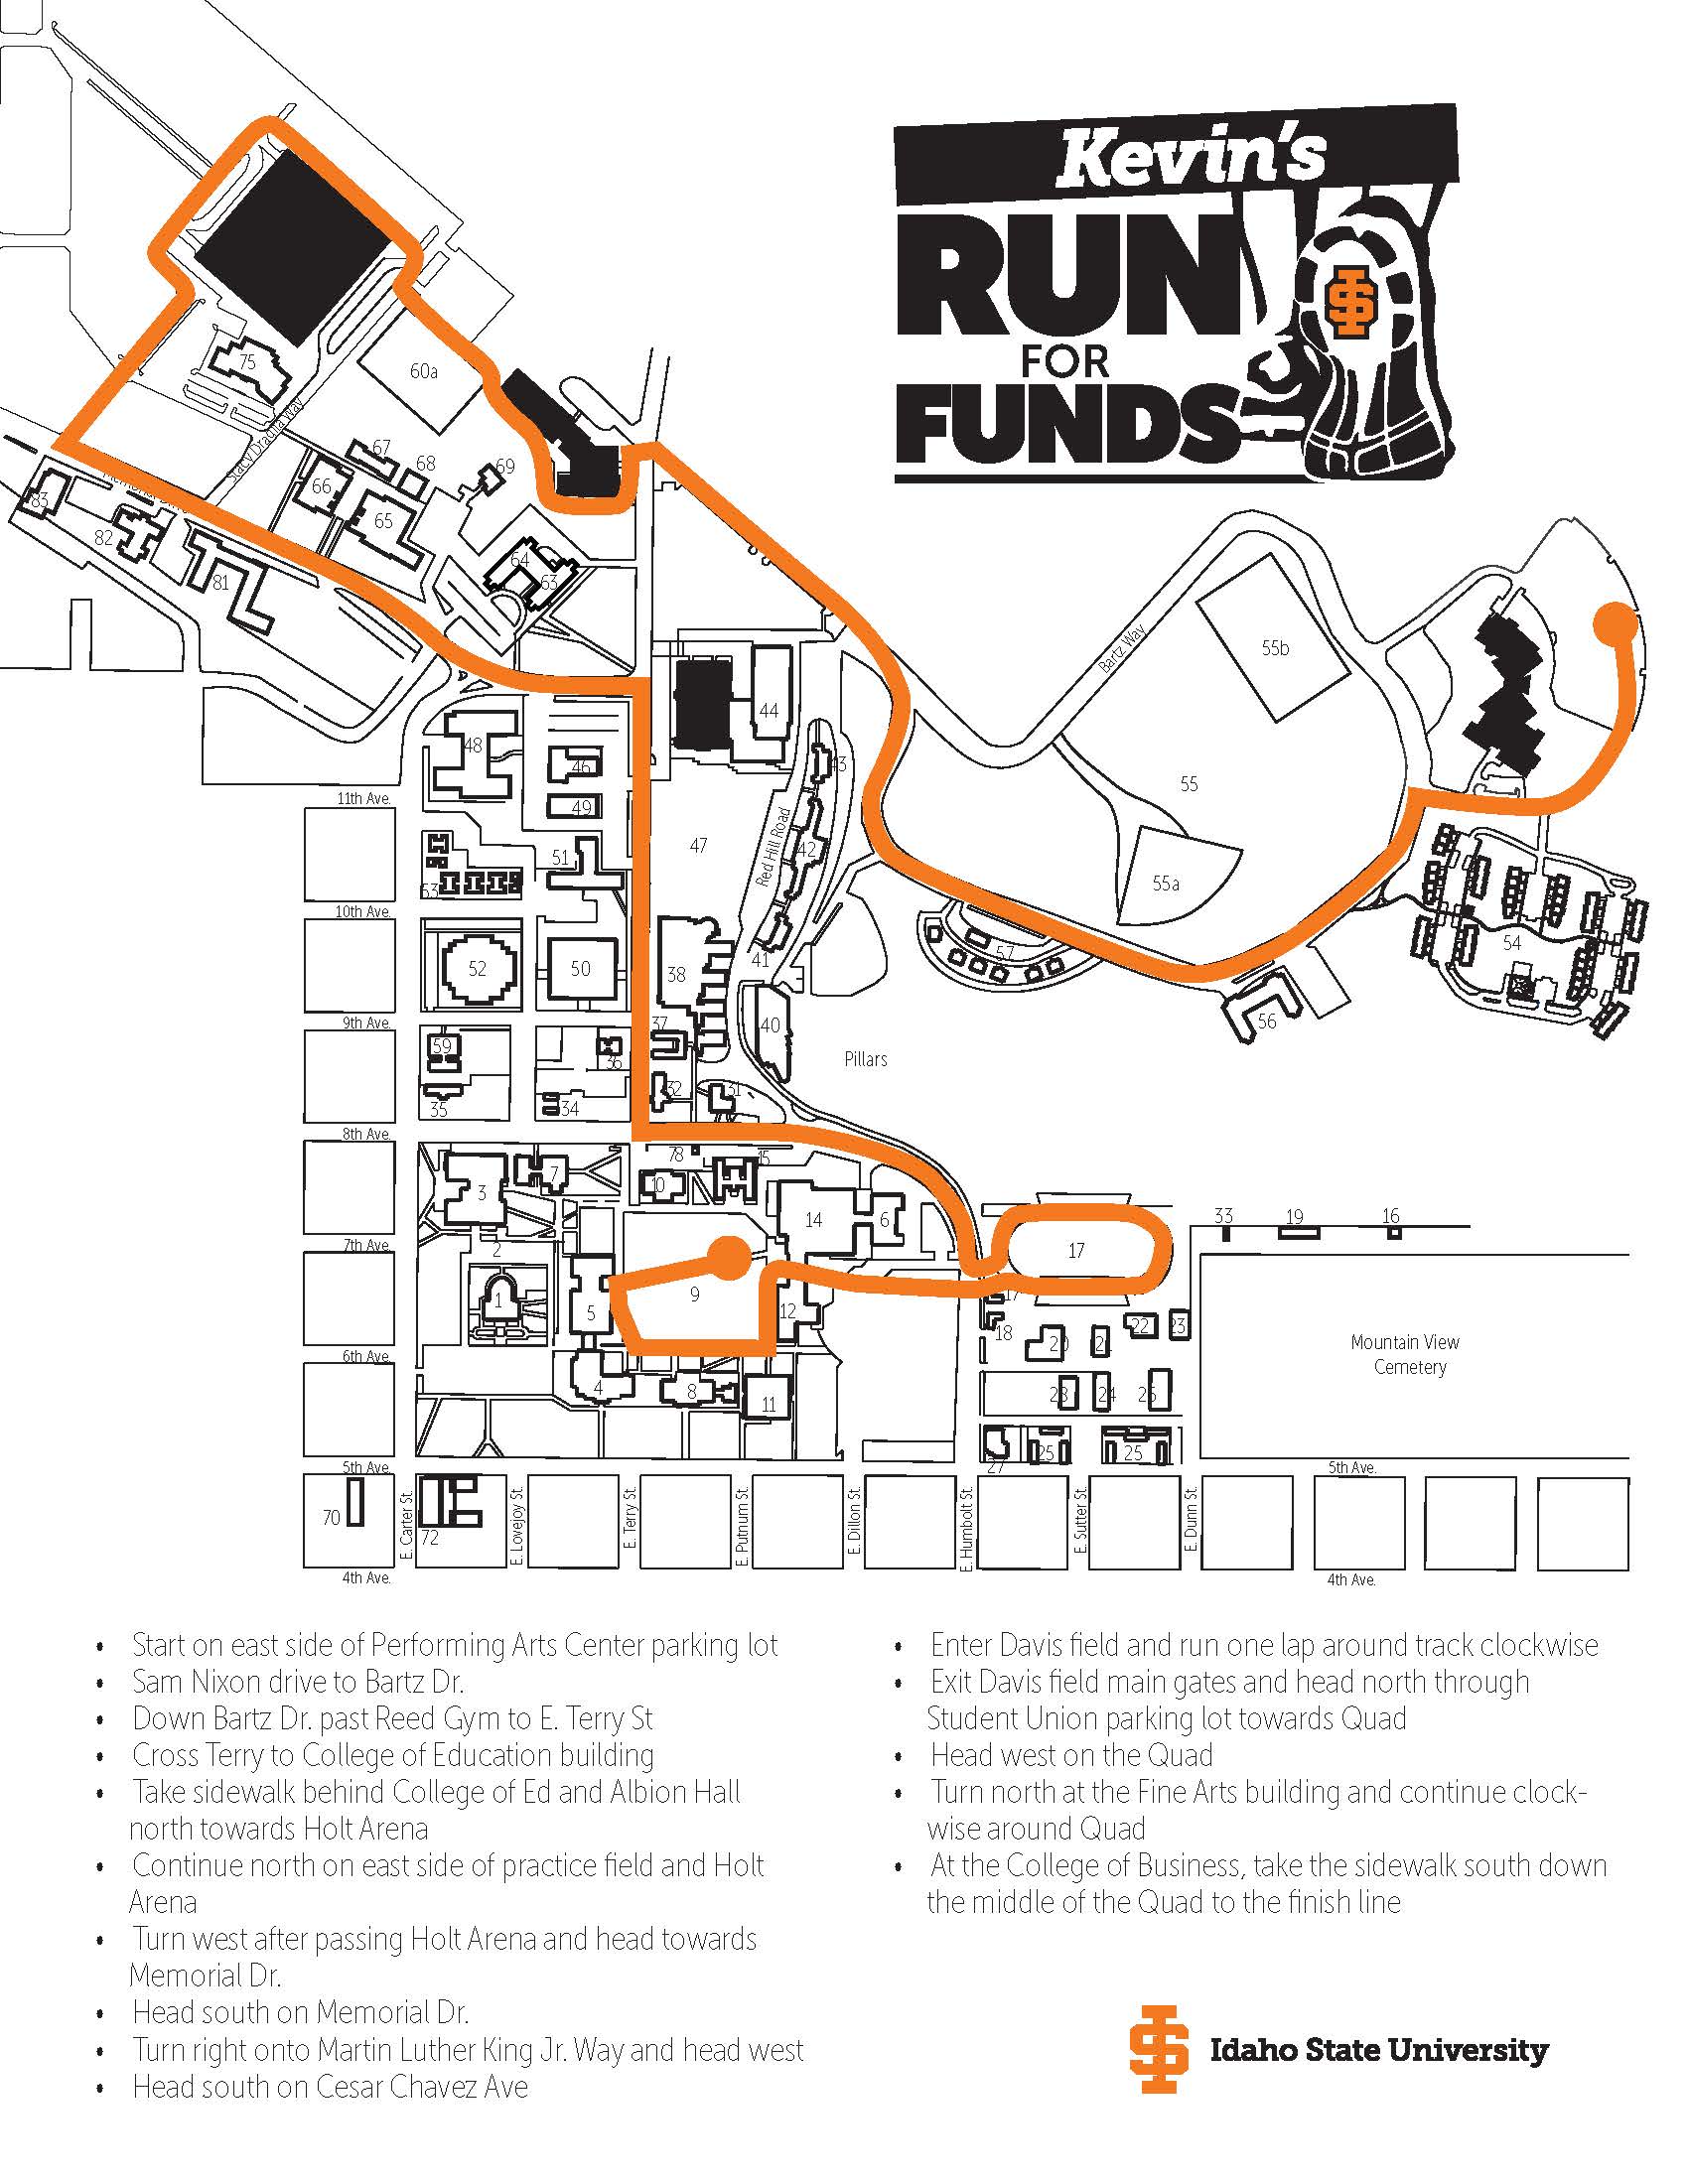 A map of Kevin's Run for Funds route